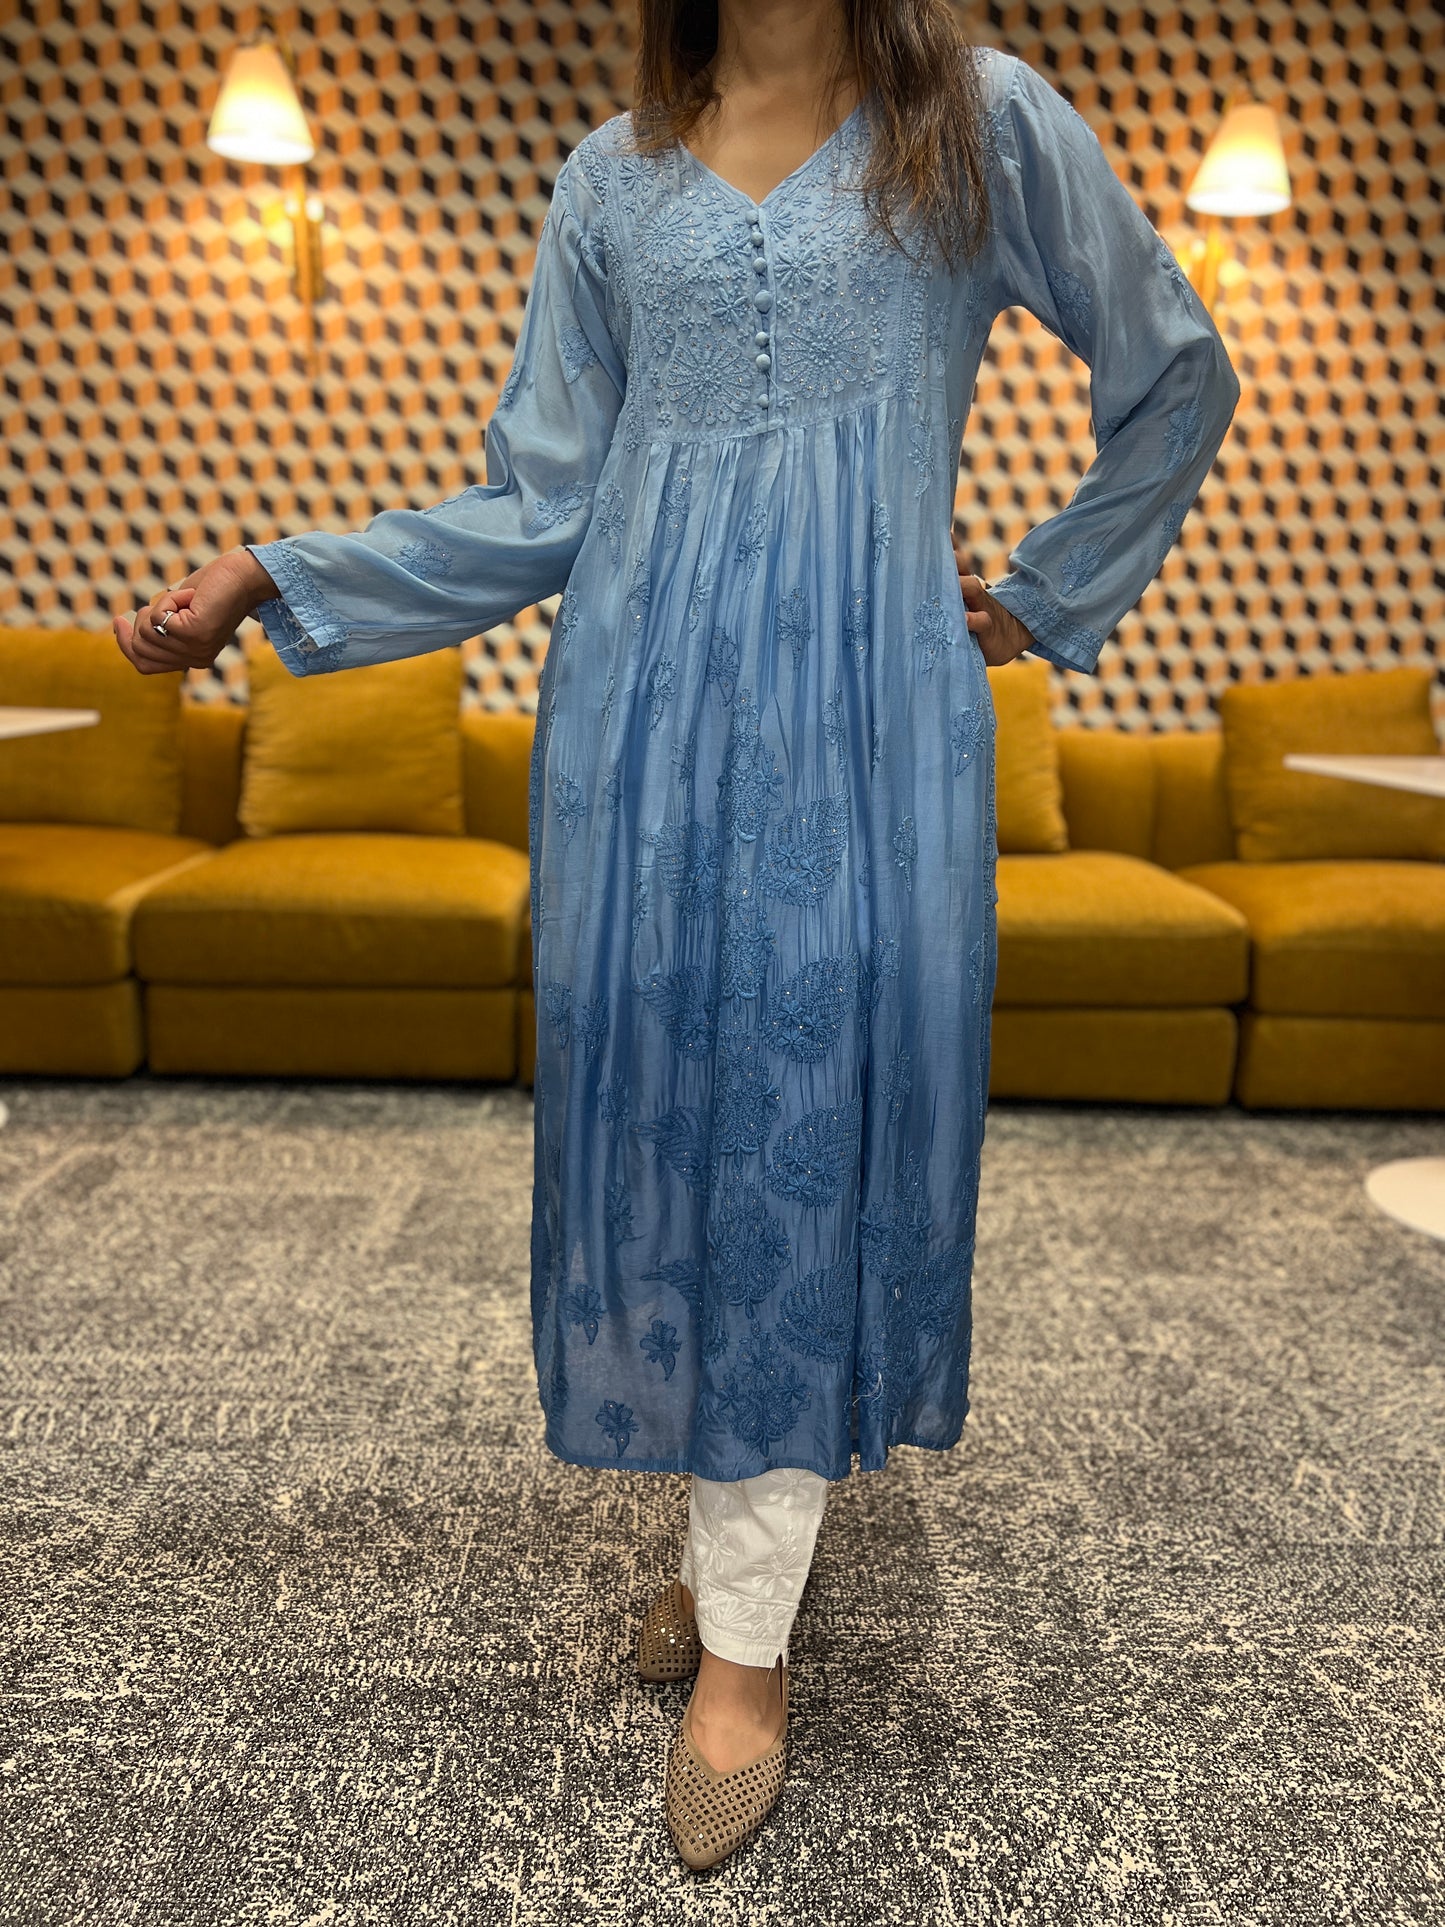 Lucknow chikankari ombre muslin kurti in blue color with mukaish work